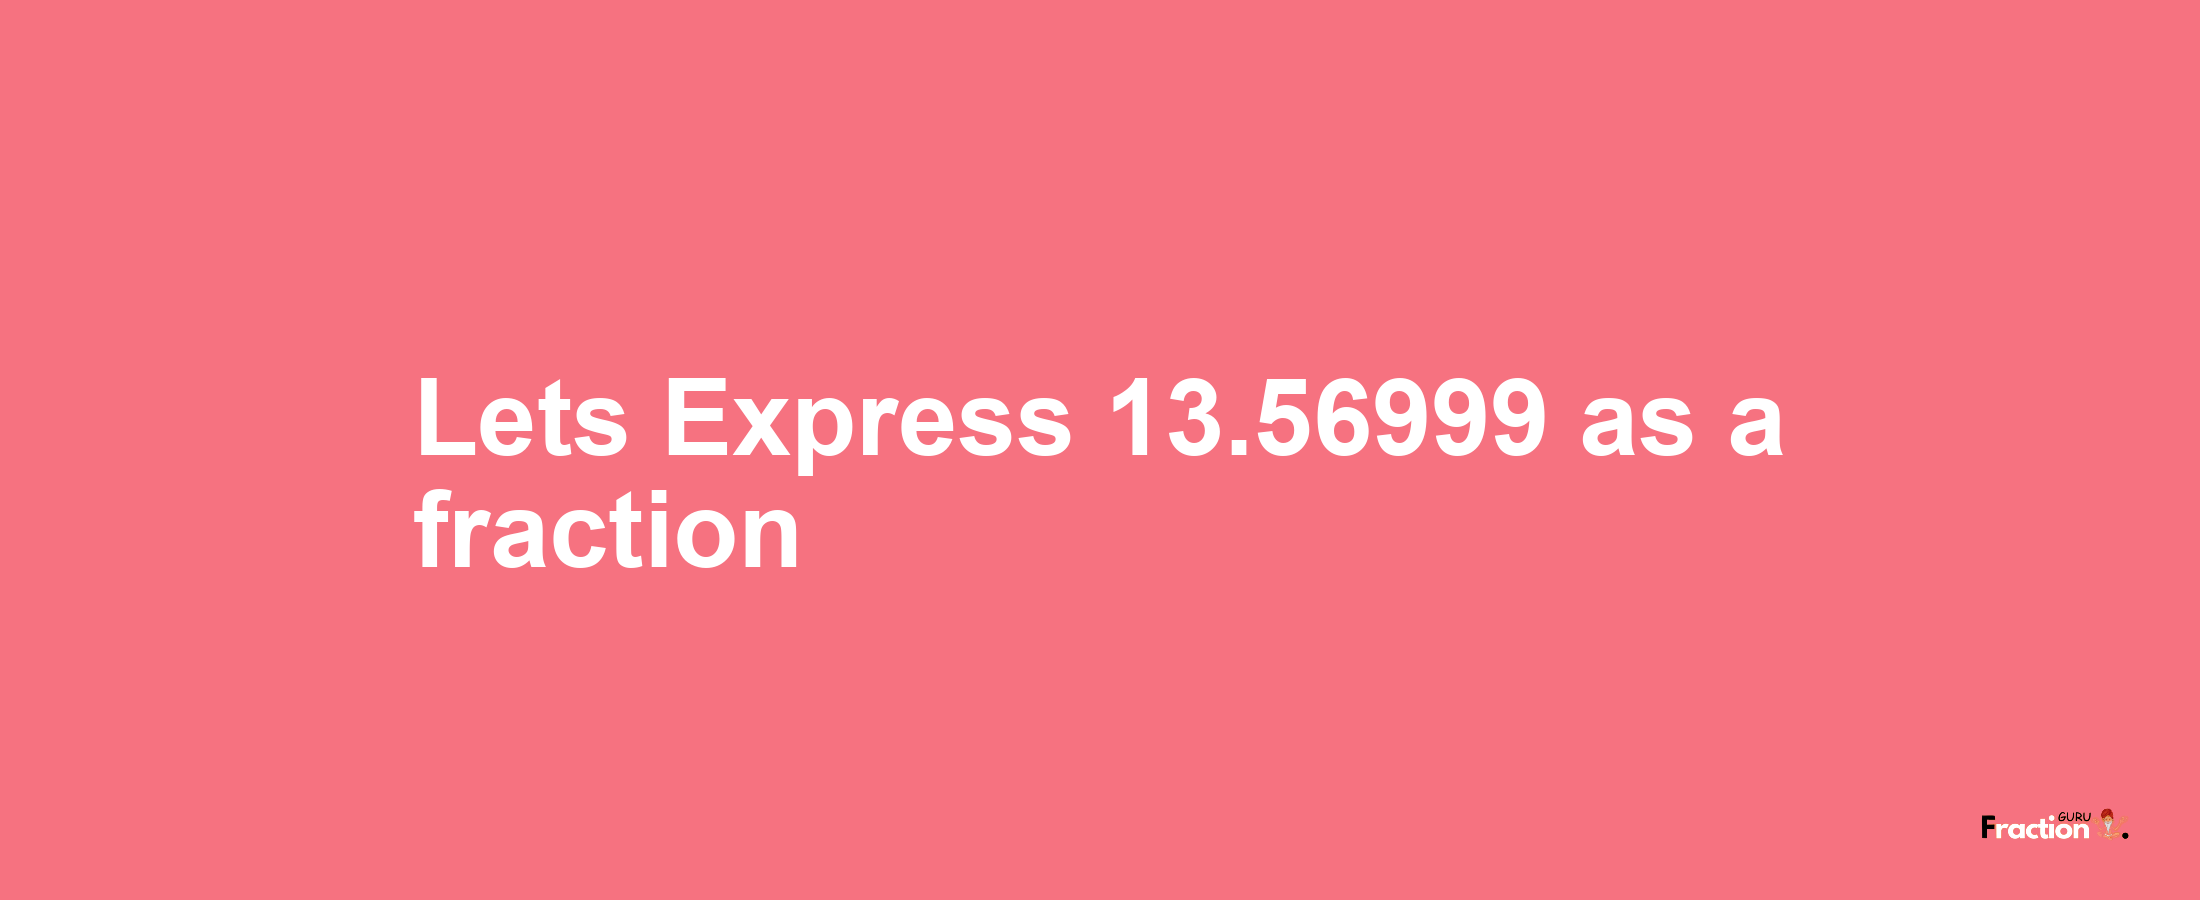 Lets Express 13.56999 as afraction